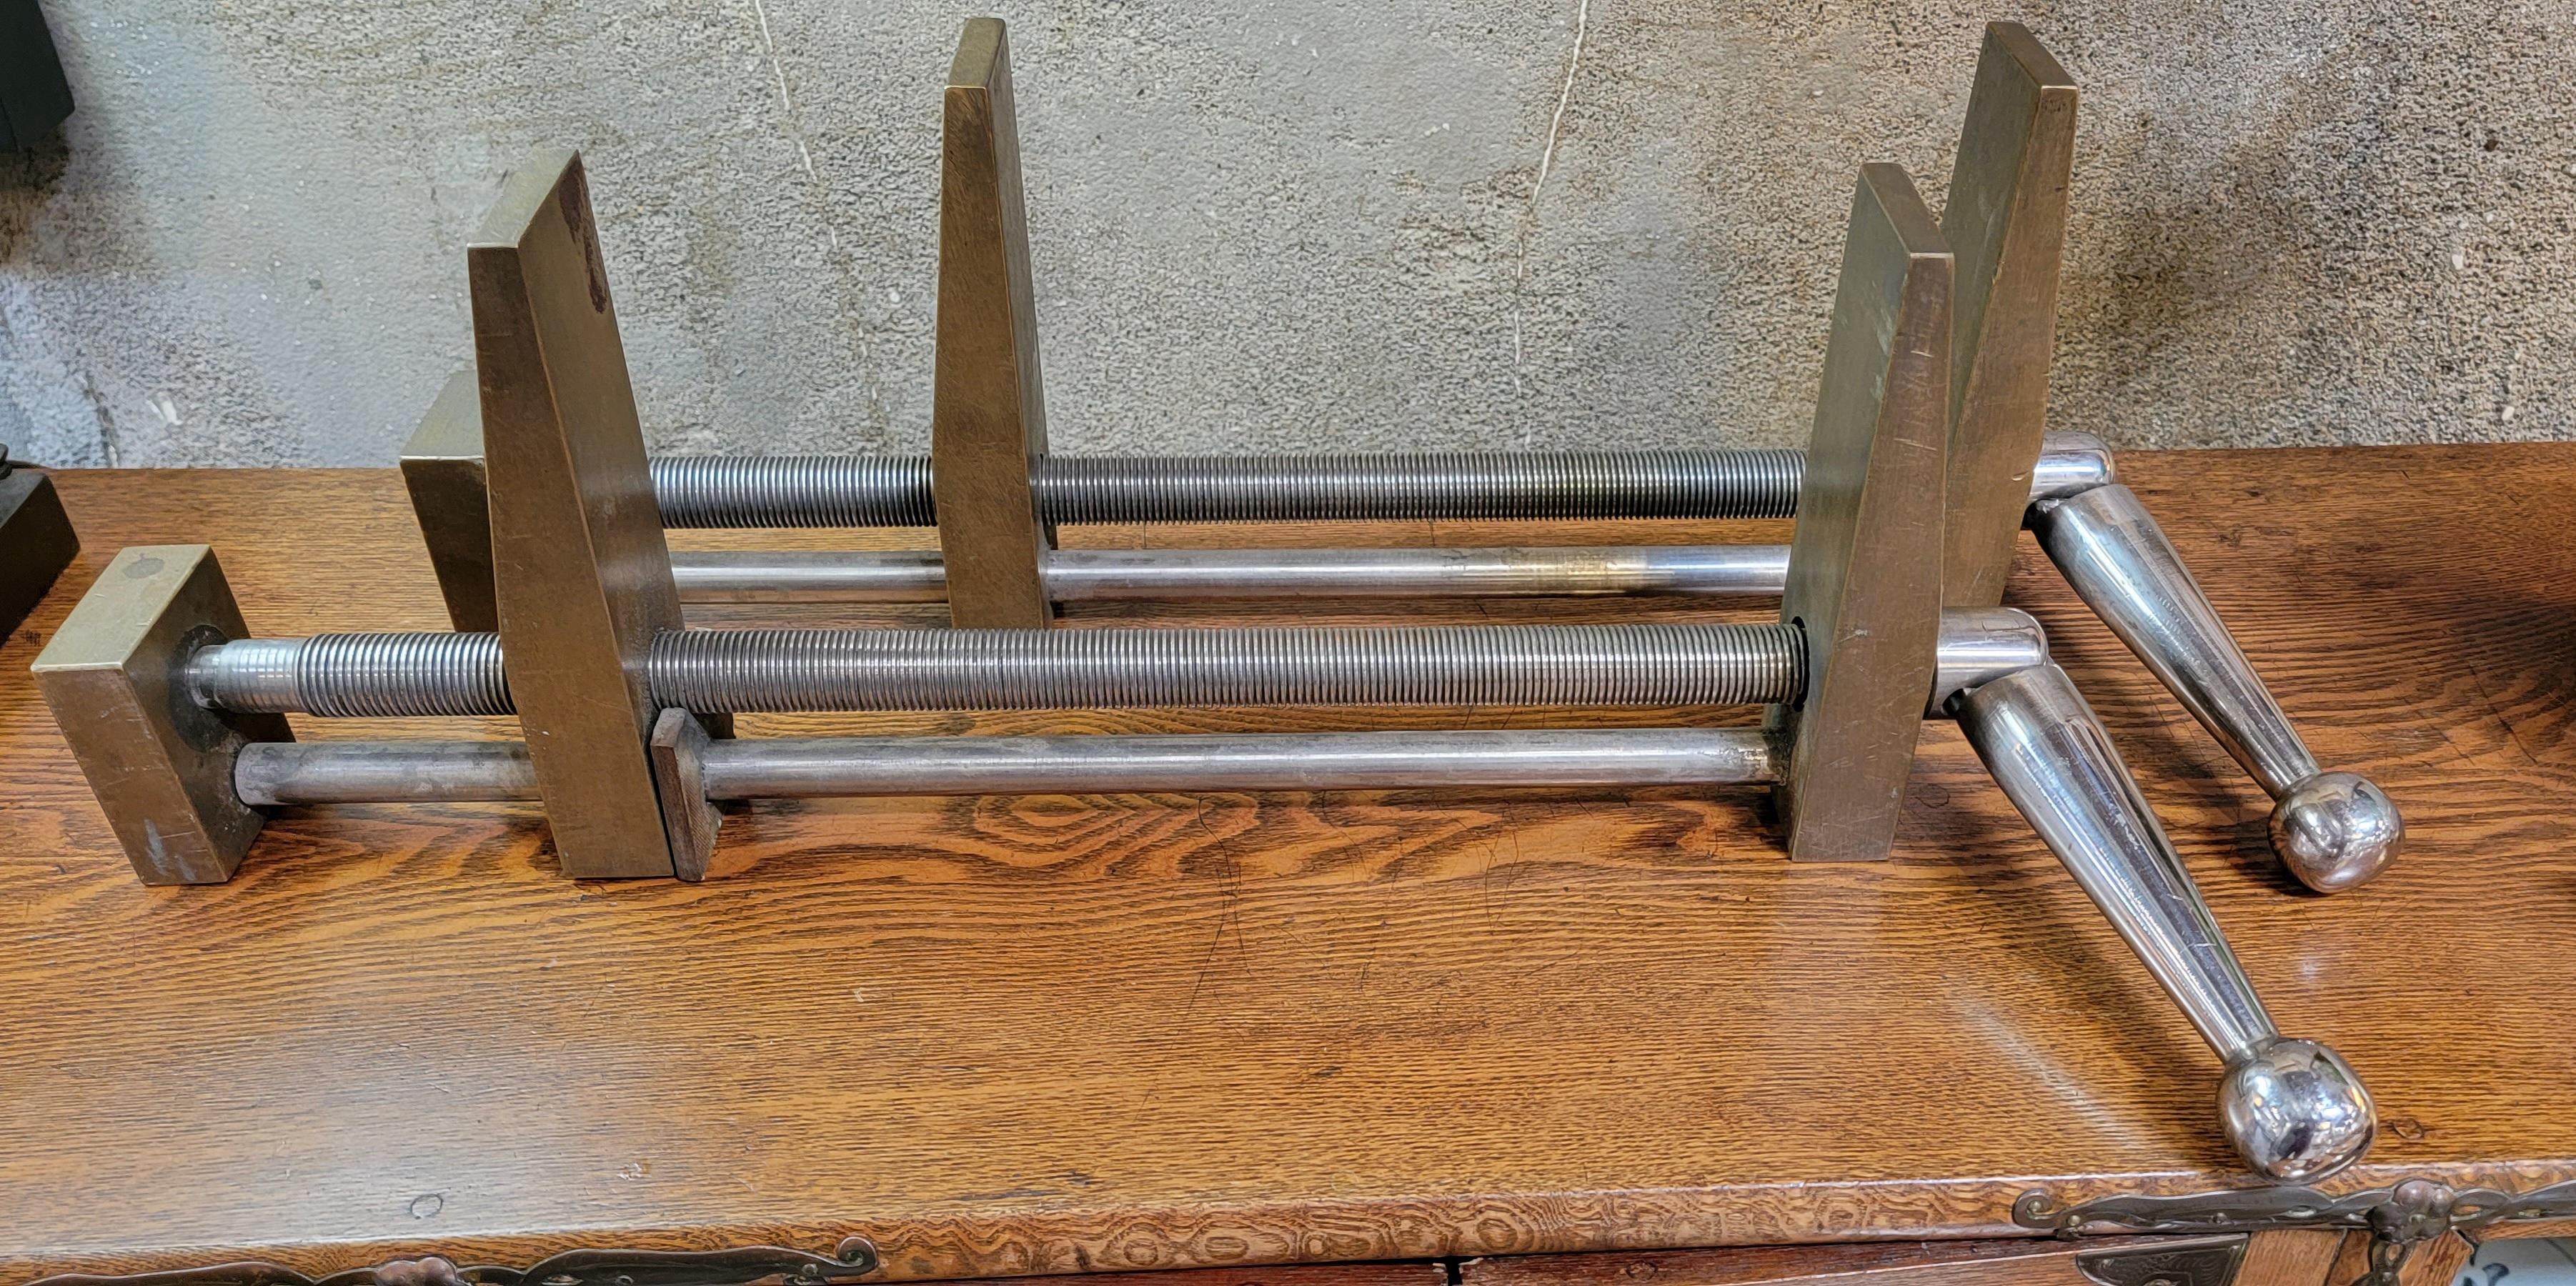 Unique pair of large-scale sash clamps. Fine craftsmanship and materials with precision to detail. Solid brass and stainless steel. When I picked these up and examined the quality and weight of these clamps I just had to buy them. I figured they